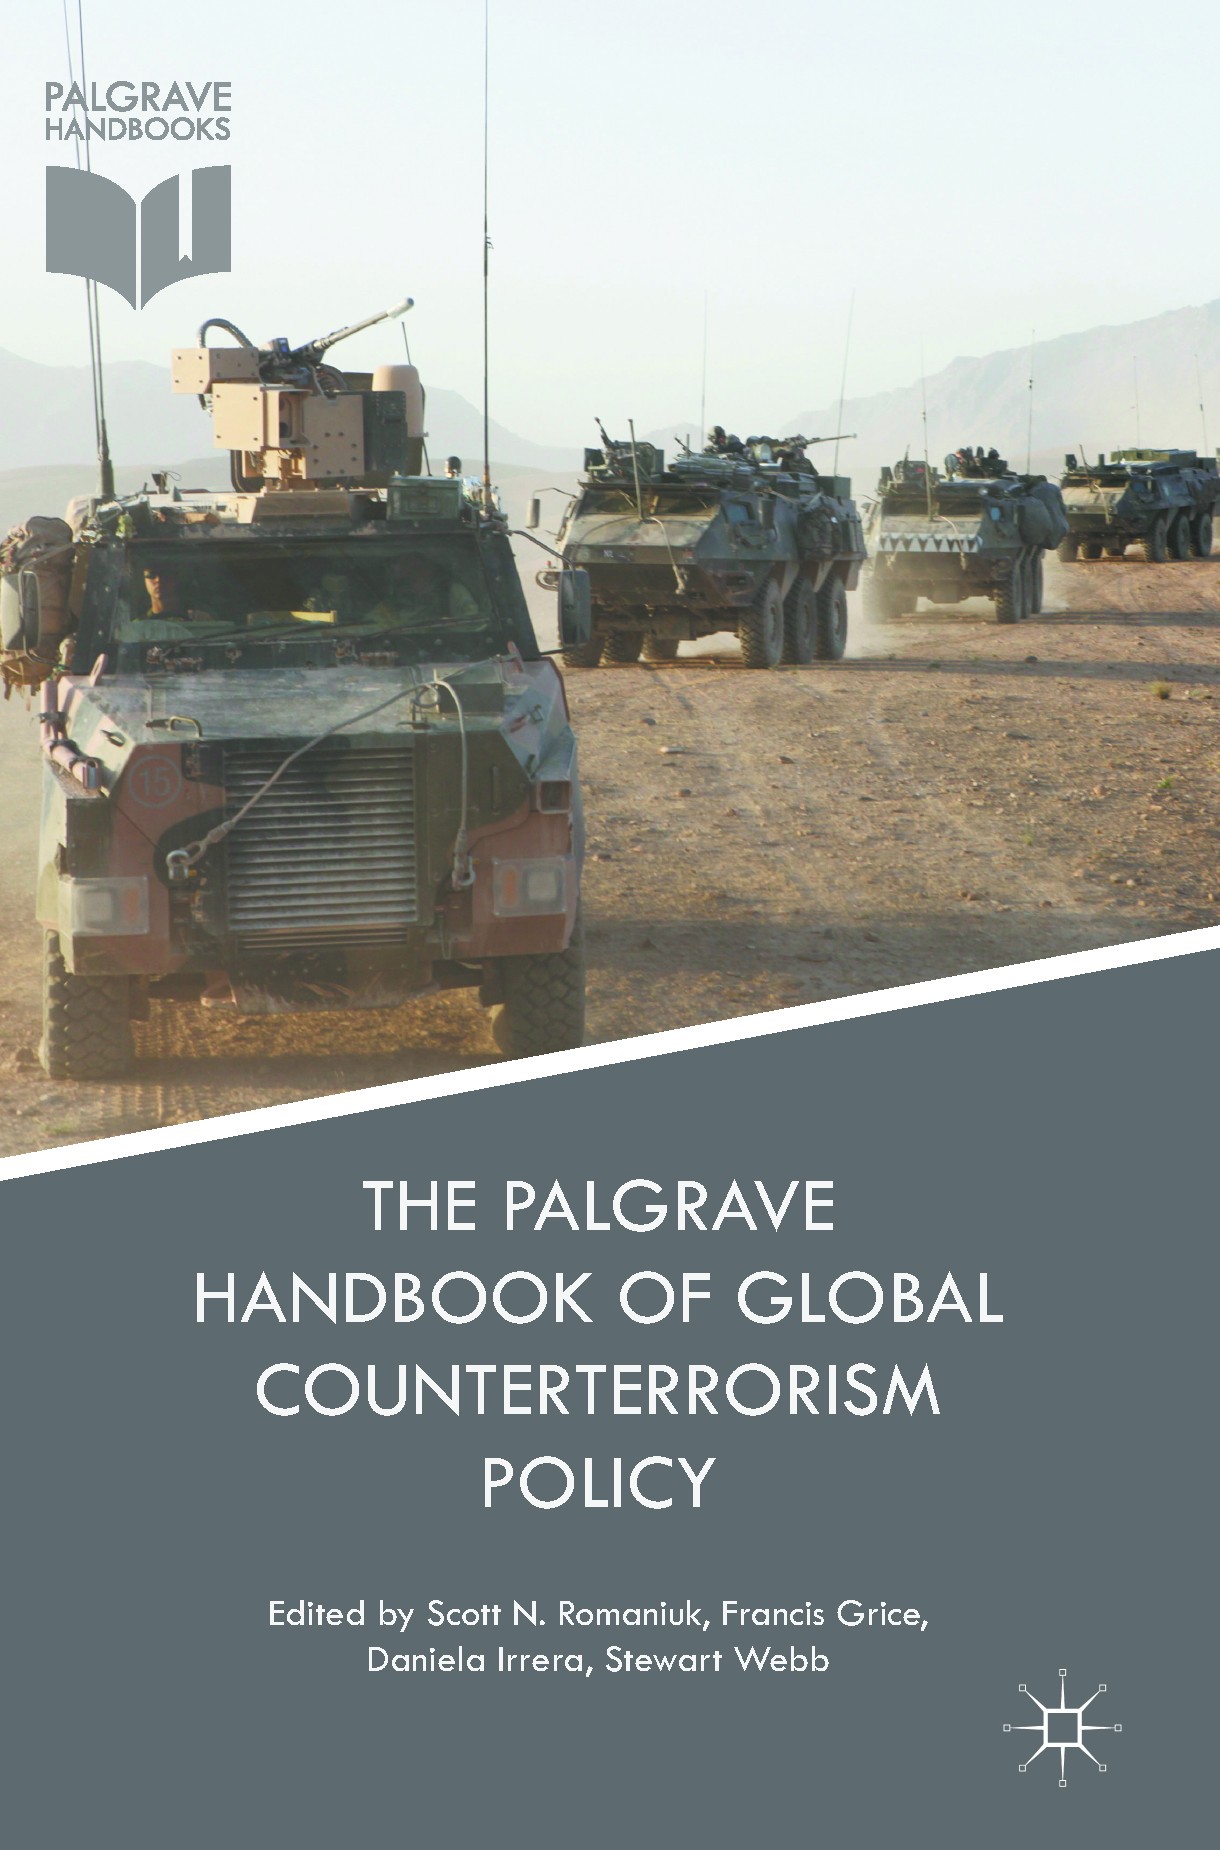 IntelBrief: The Complexity of Peacekeeping Operations - The Soufan